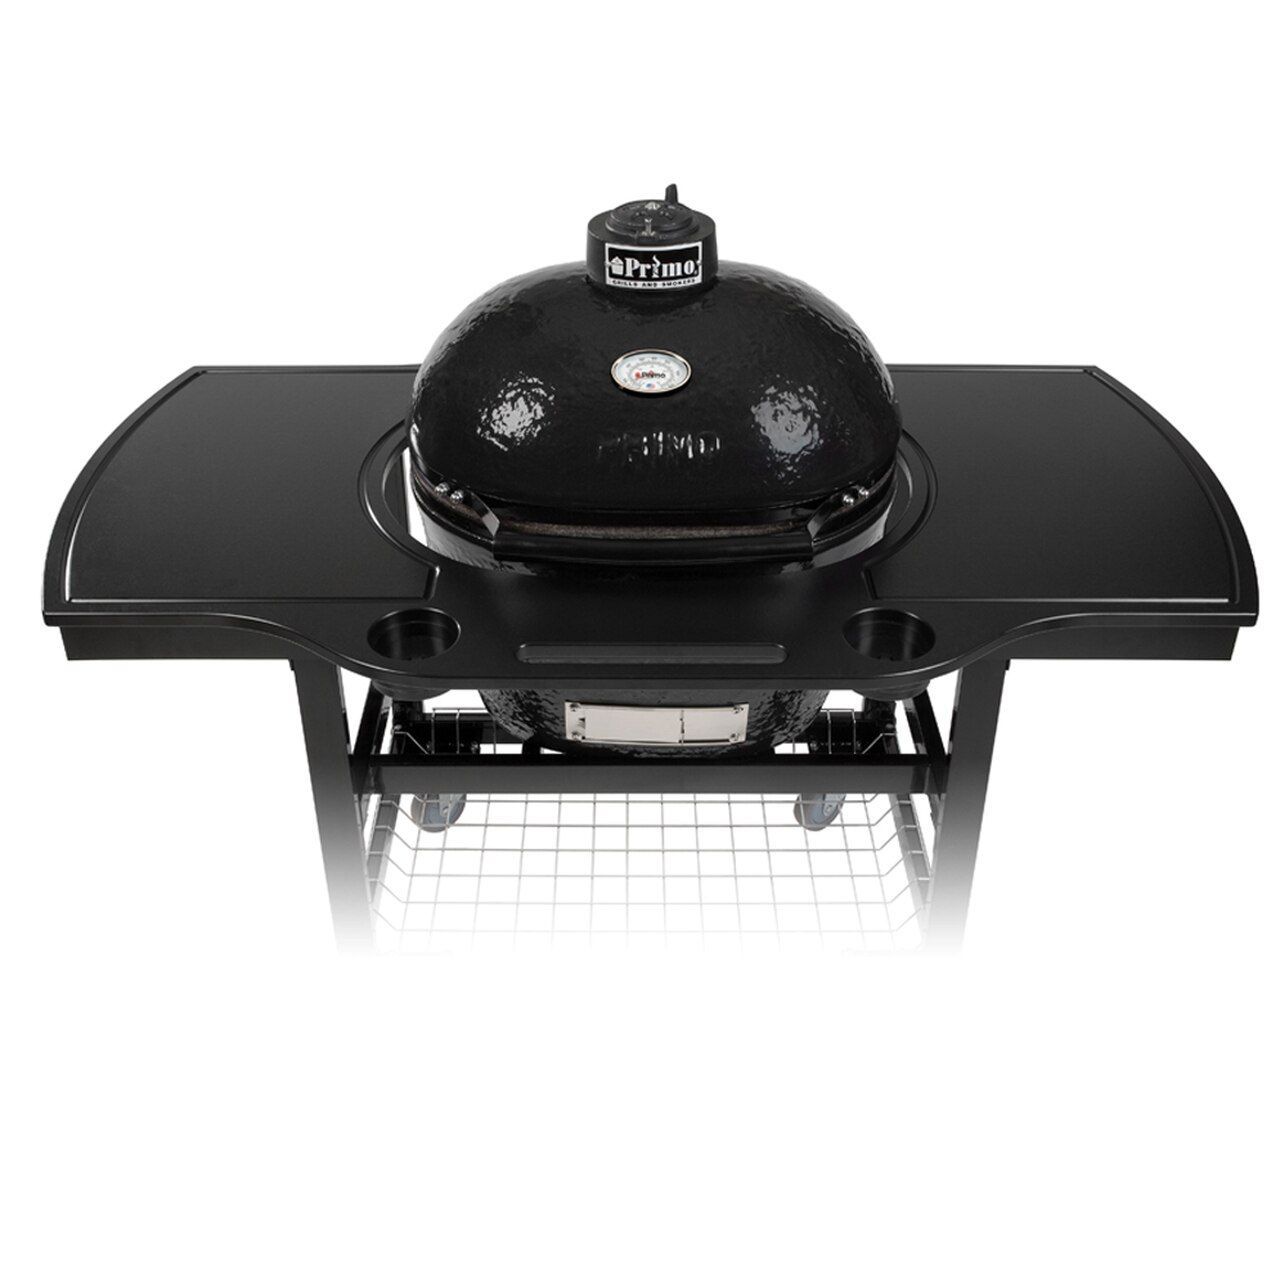 Primo One Piece Island Top For Oval Grill XL400